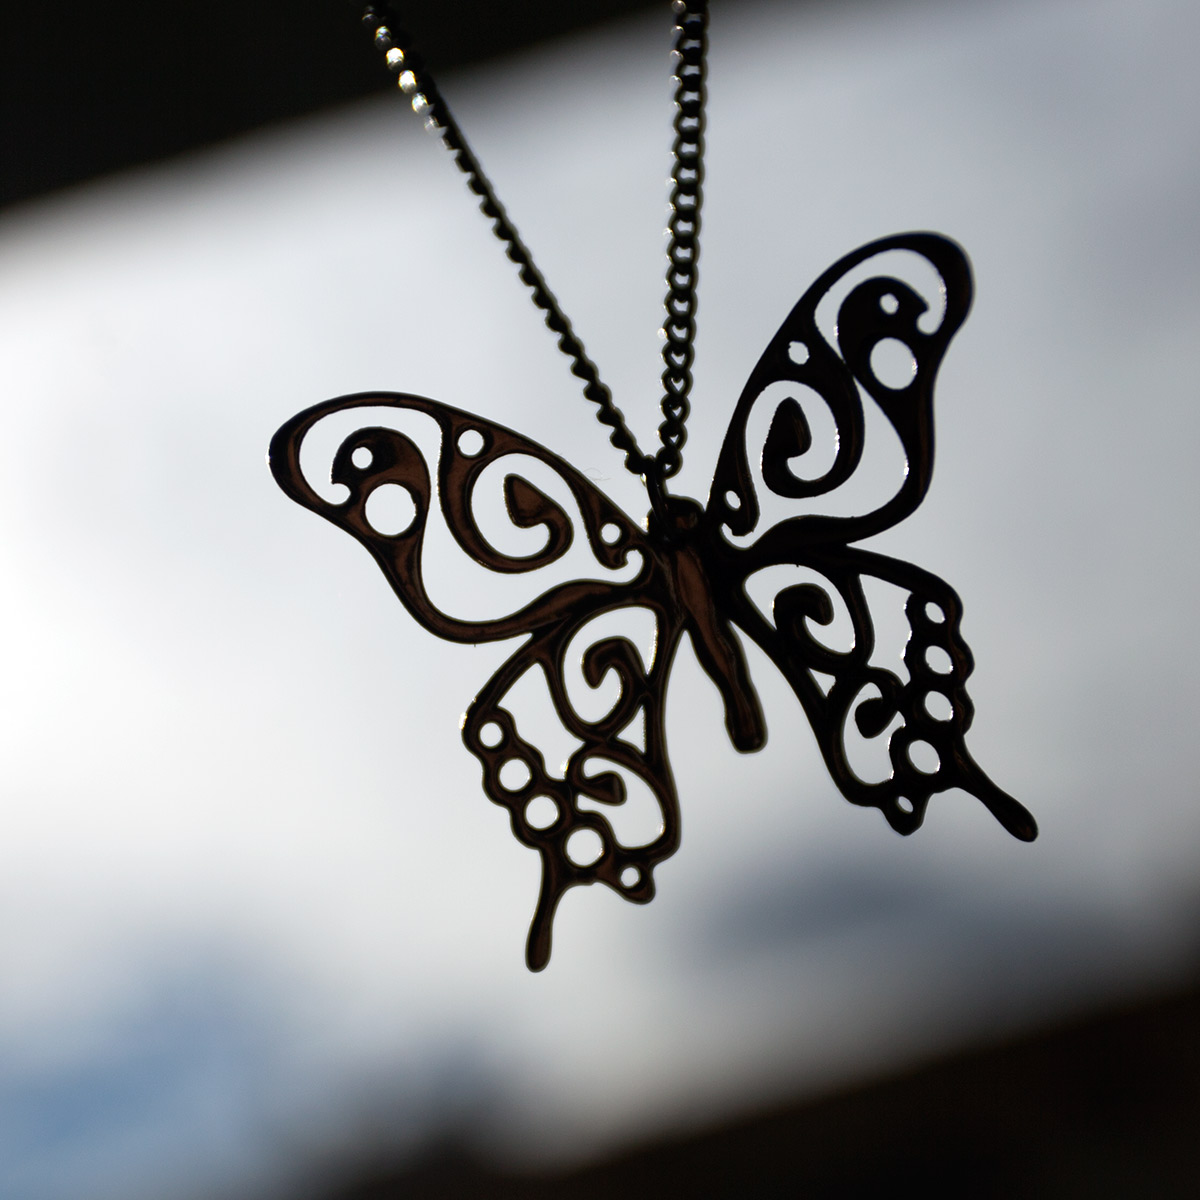 Swallowtail Butterfly Pendant || Butterfly Necklace Of Albata || Pendant "papilio Machaon" On A Chain